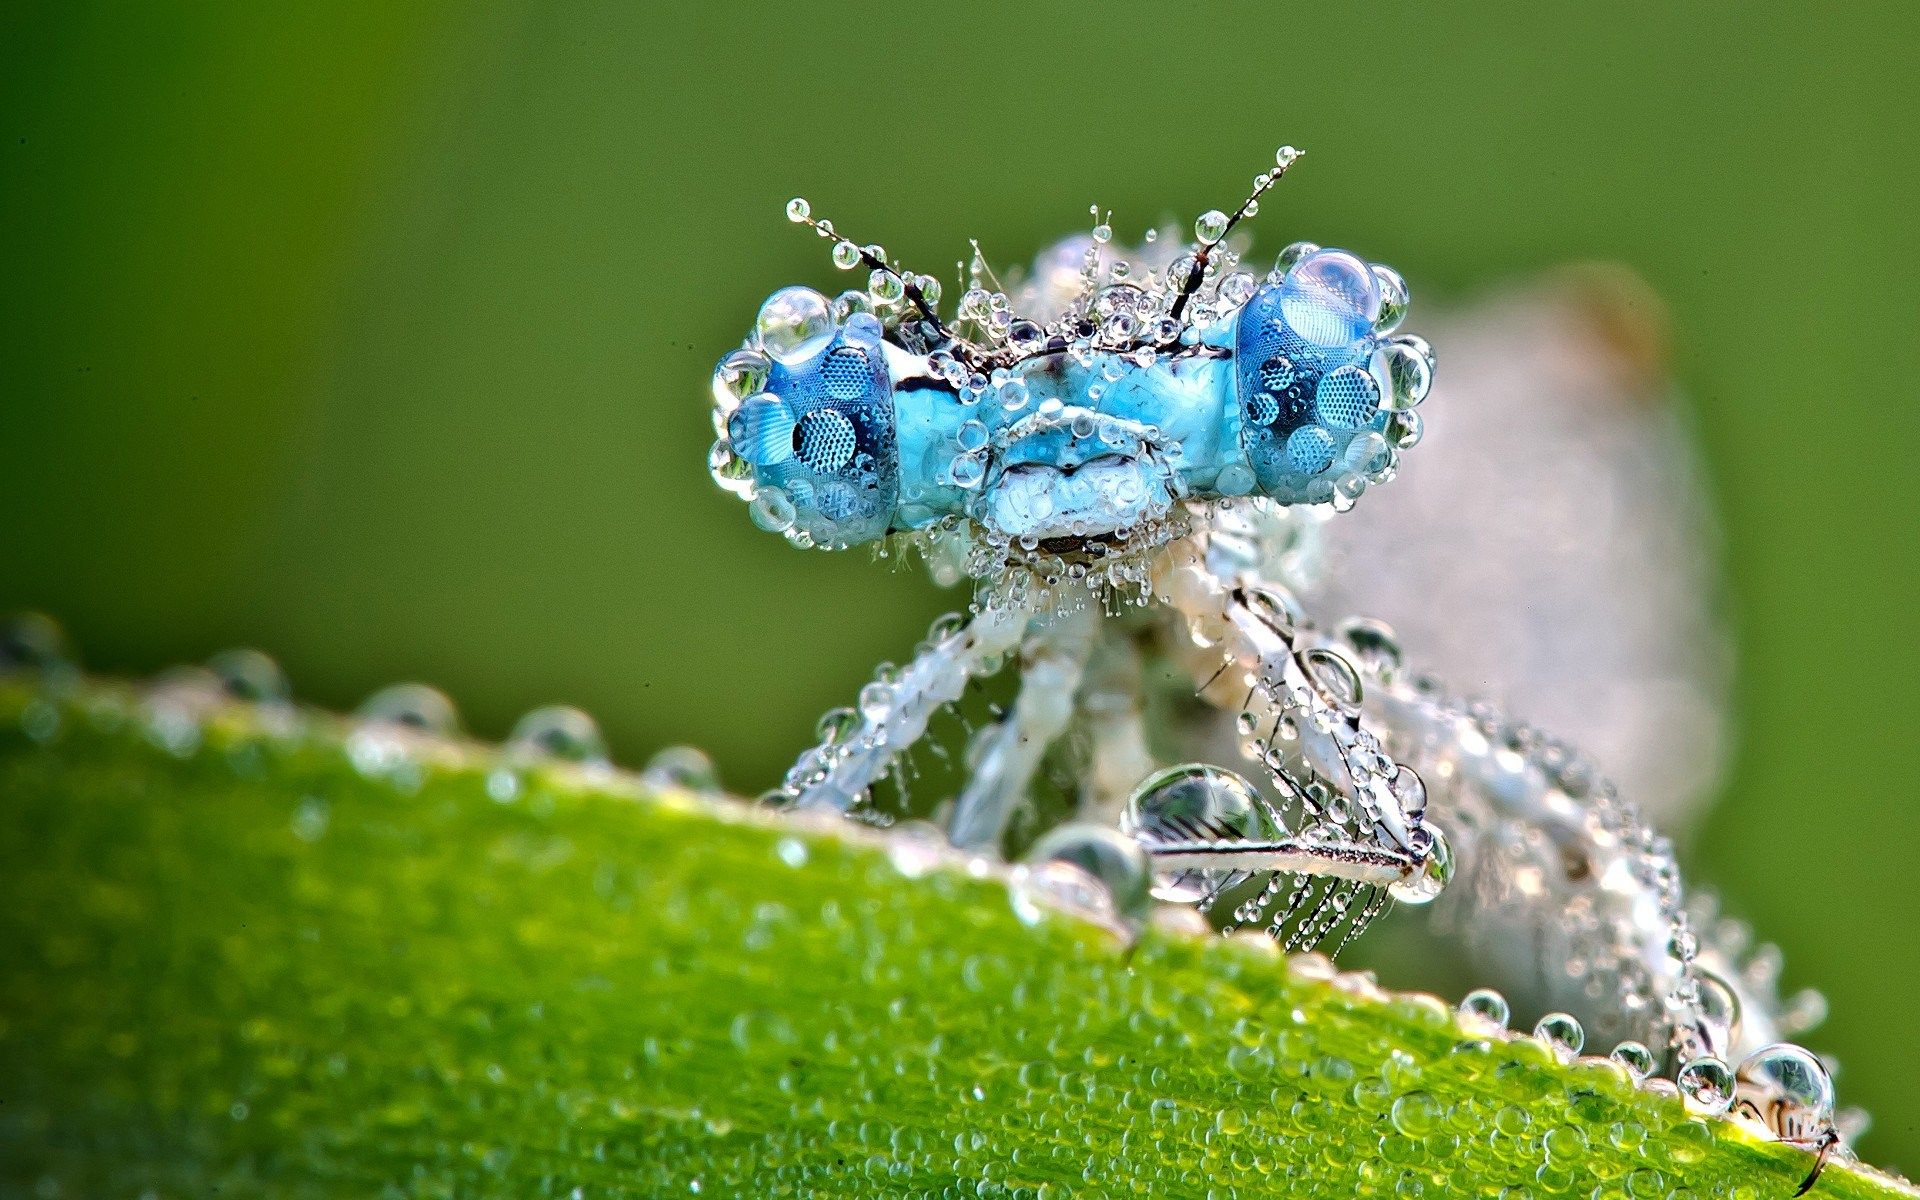 HD wallpaper, Dew, Dragonfly, Insect, Drops